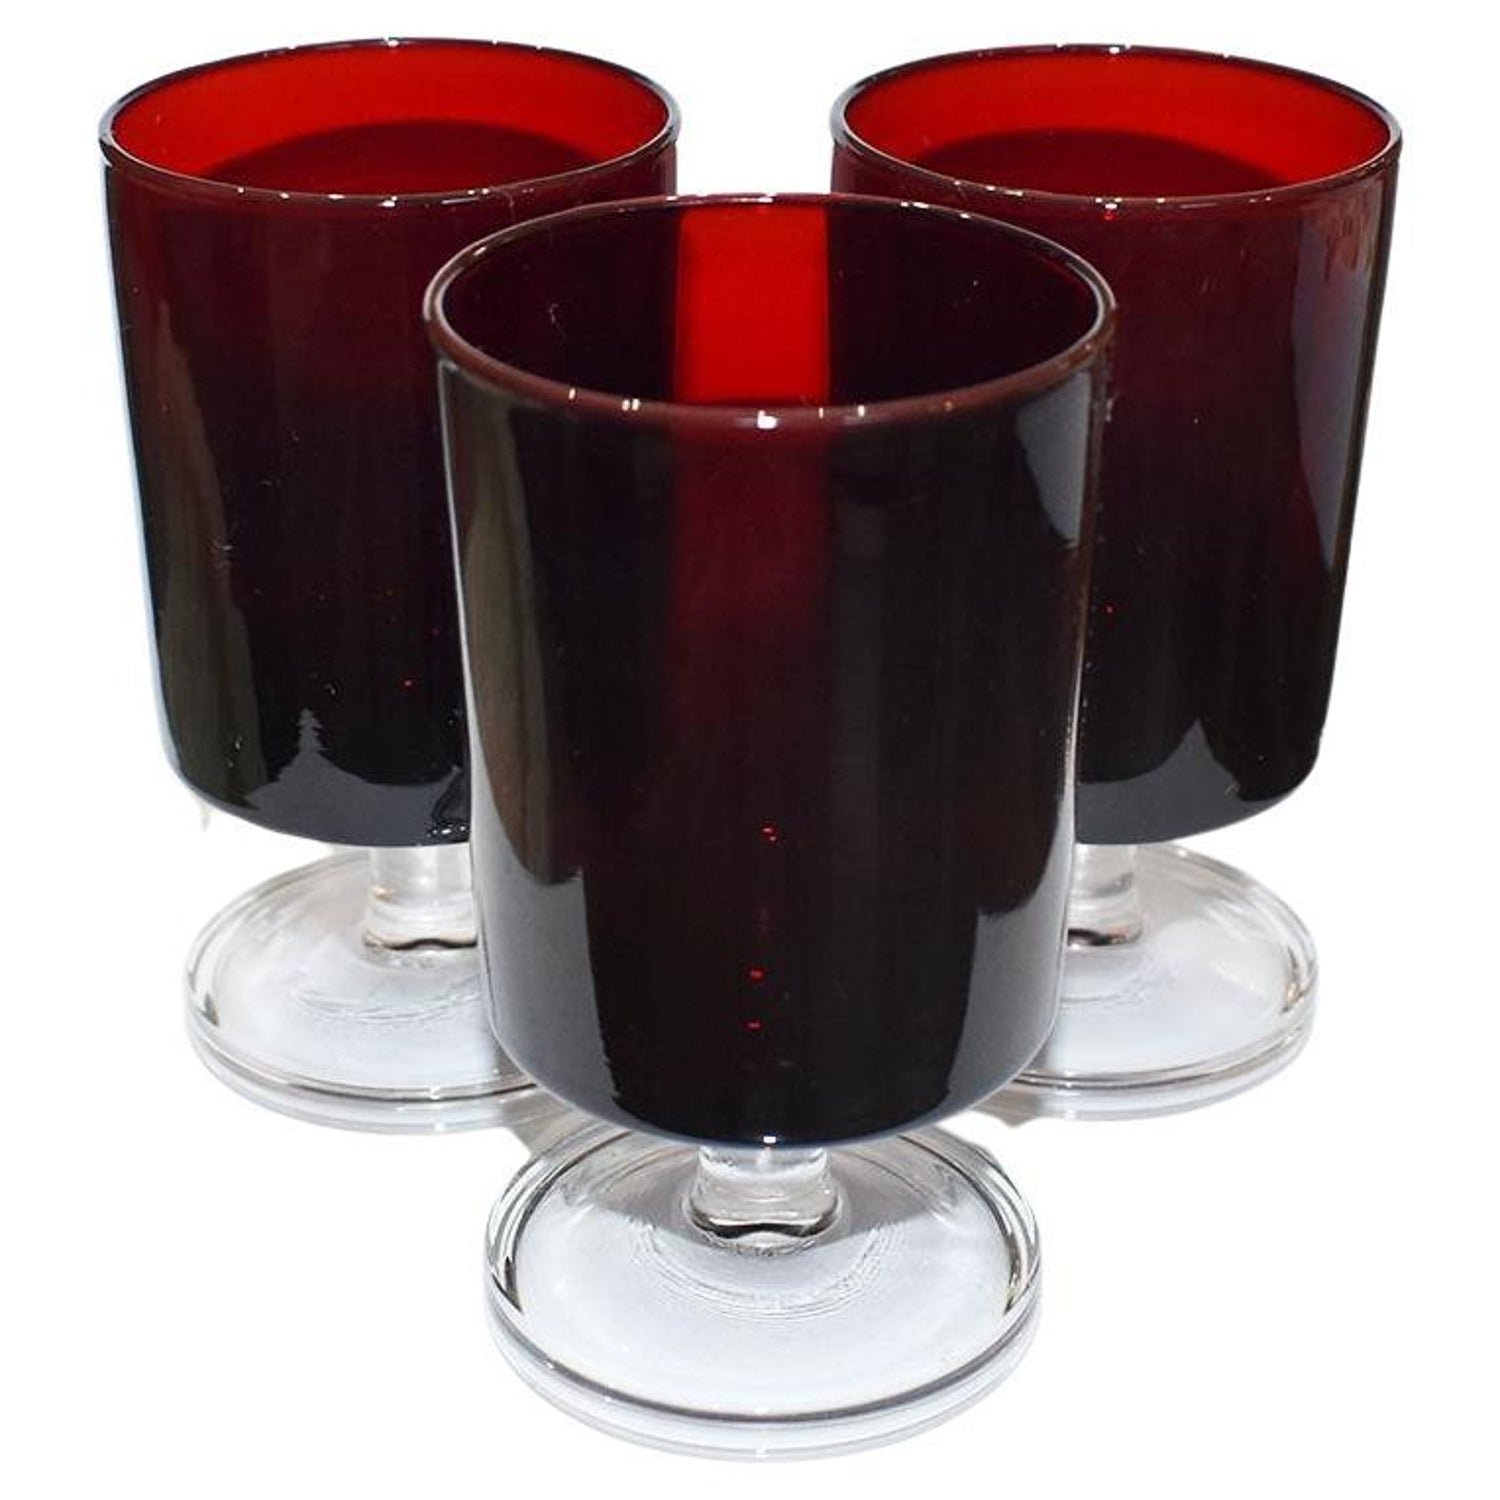 https://a.1stdibscdn.com/set-of-3-red-french-glass-cordial-glasses-luminarc-france-for-sale/f_33823/f_313418821670446979568/f_31341882_1670446979794_bg_processed.jpg?width=1500